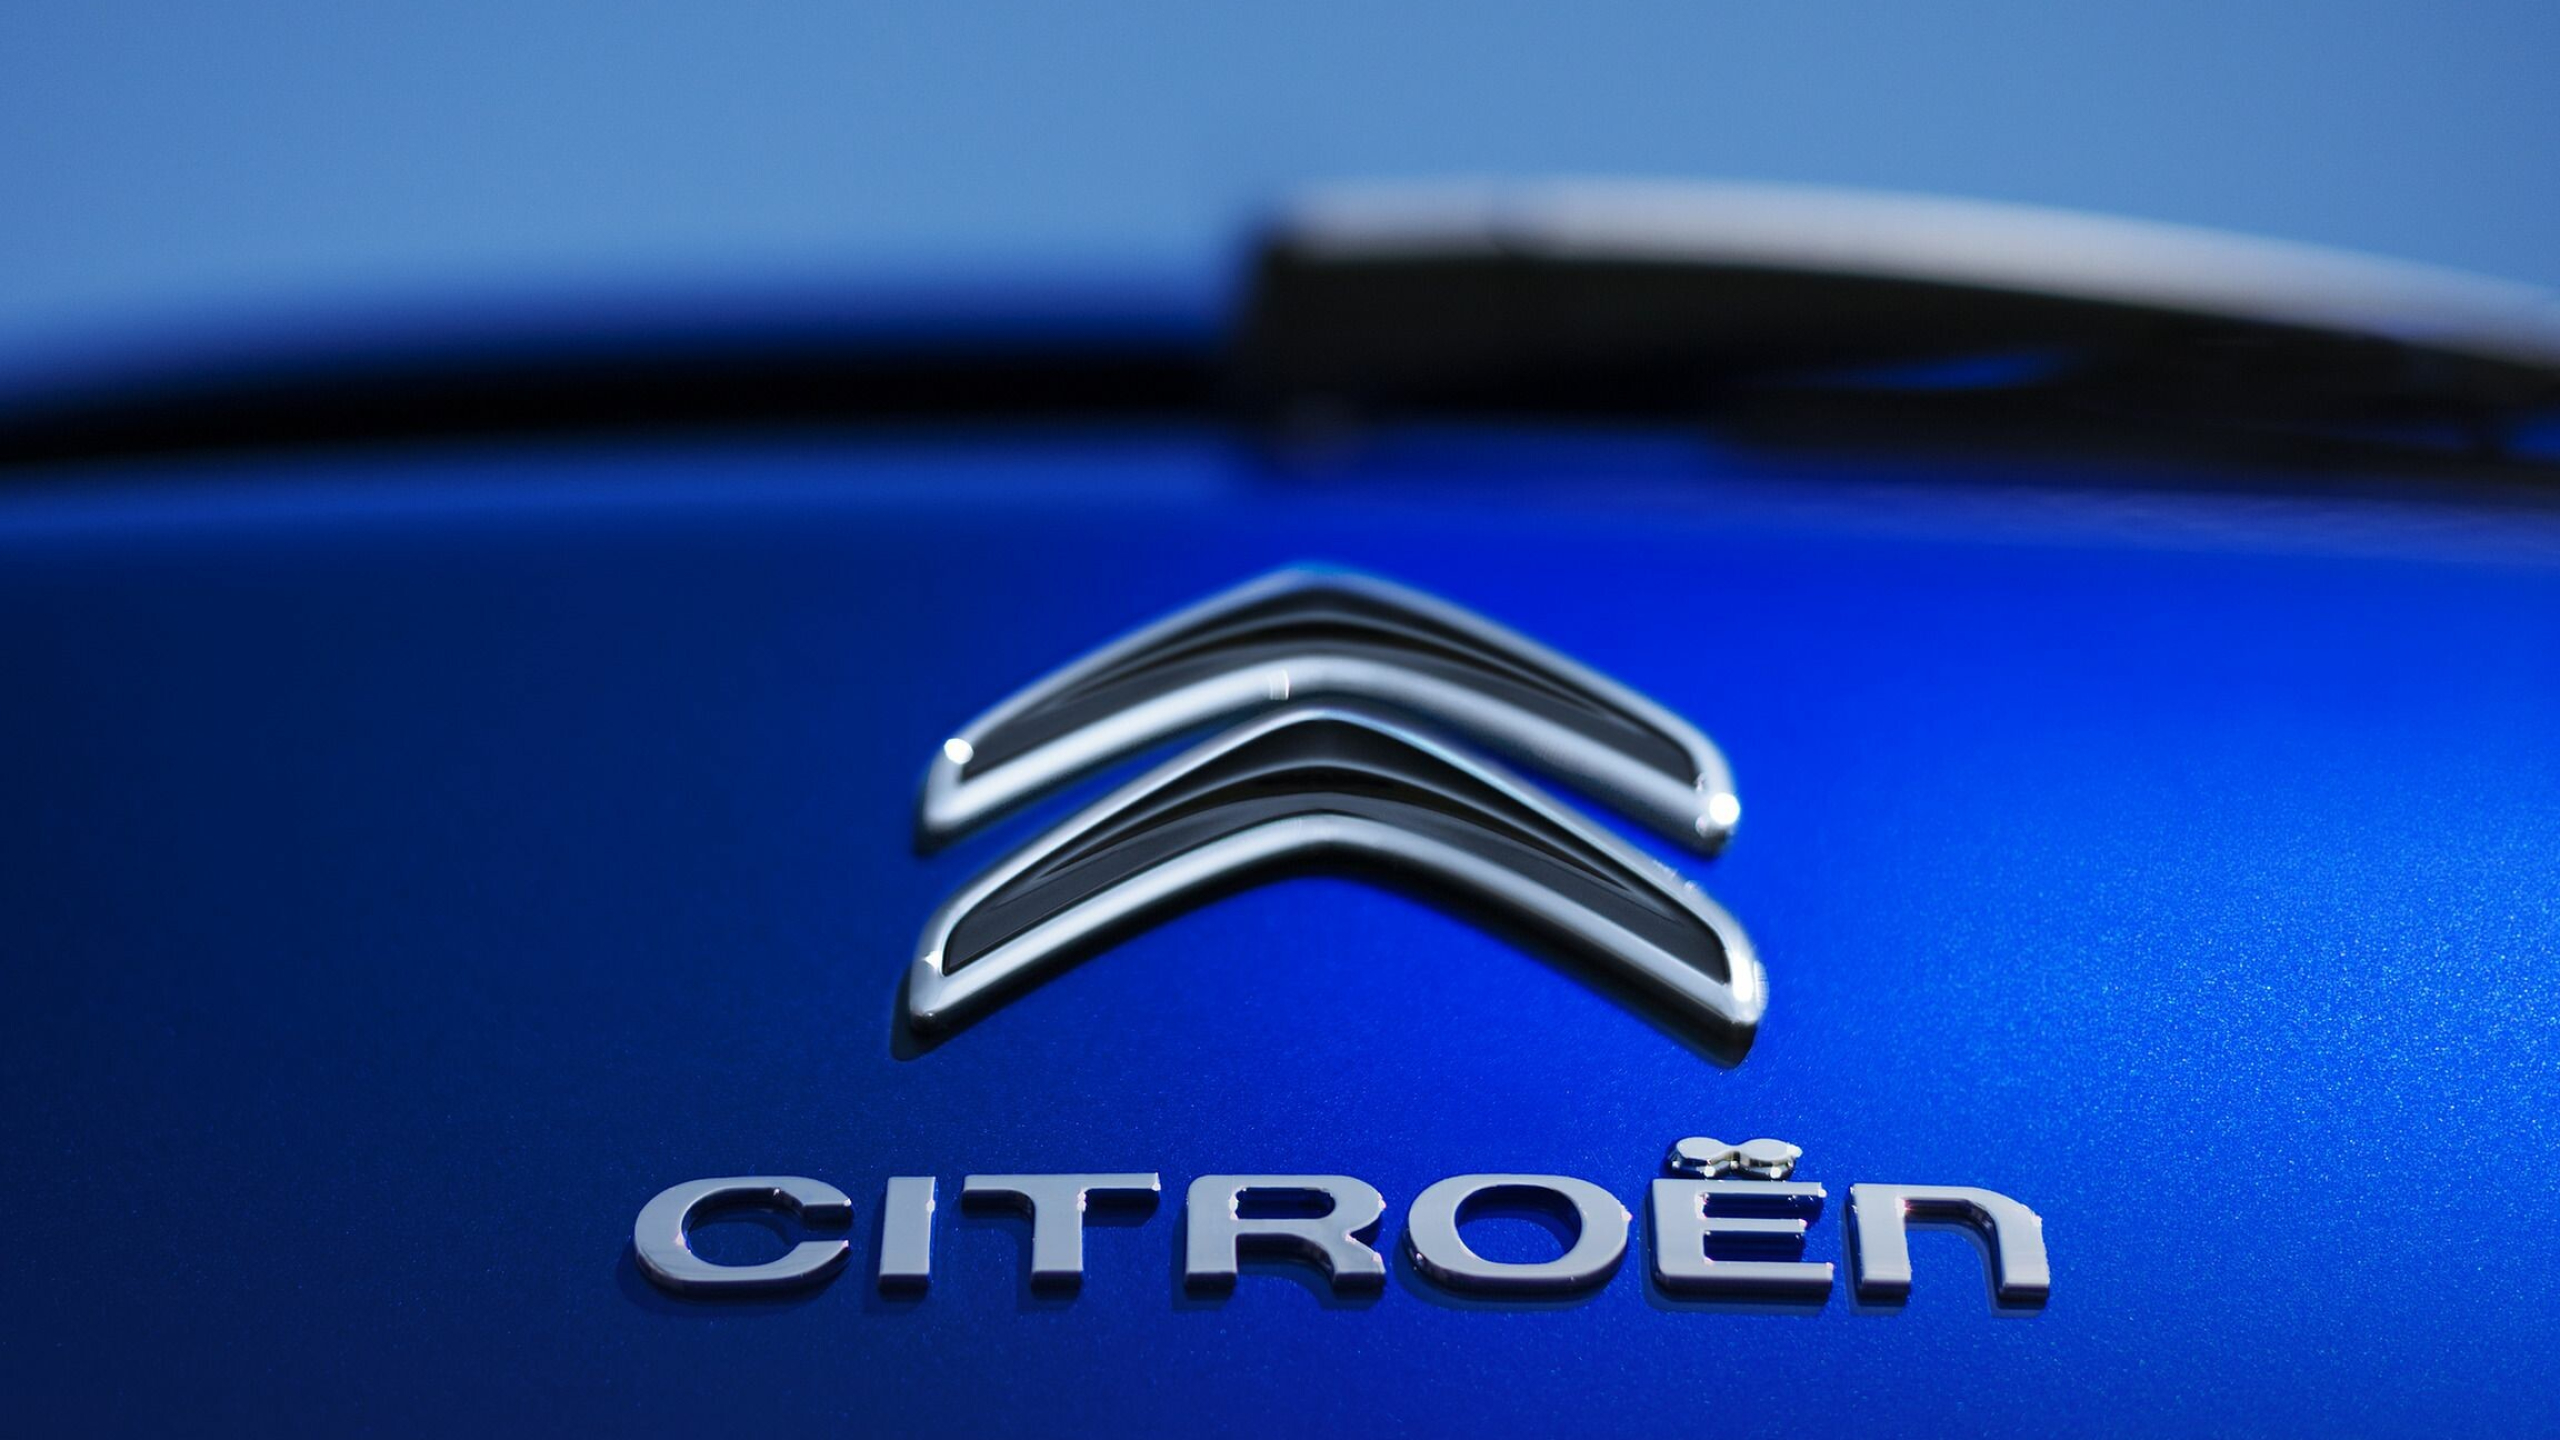 Citroen: Produced model DS, the first mass-produced car with modern disc brakes, in 1955. 2560x1440 HD Wallpaper.